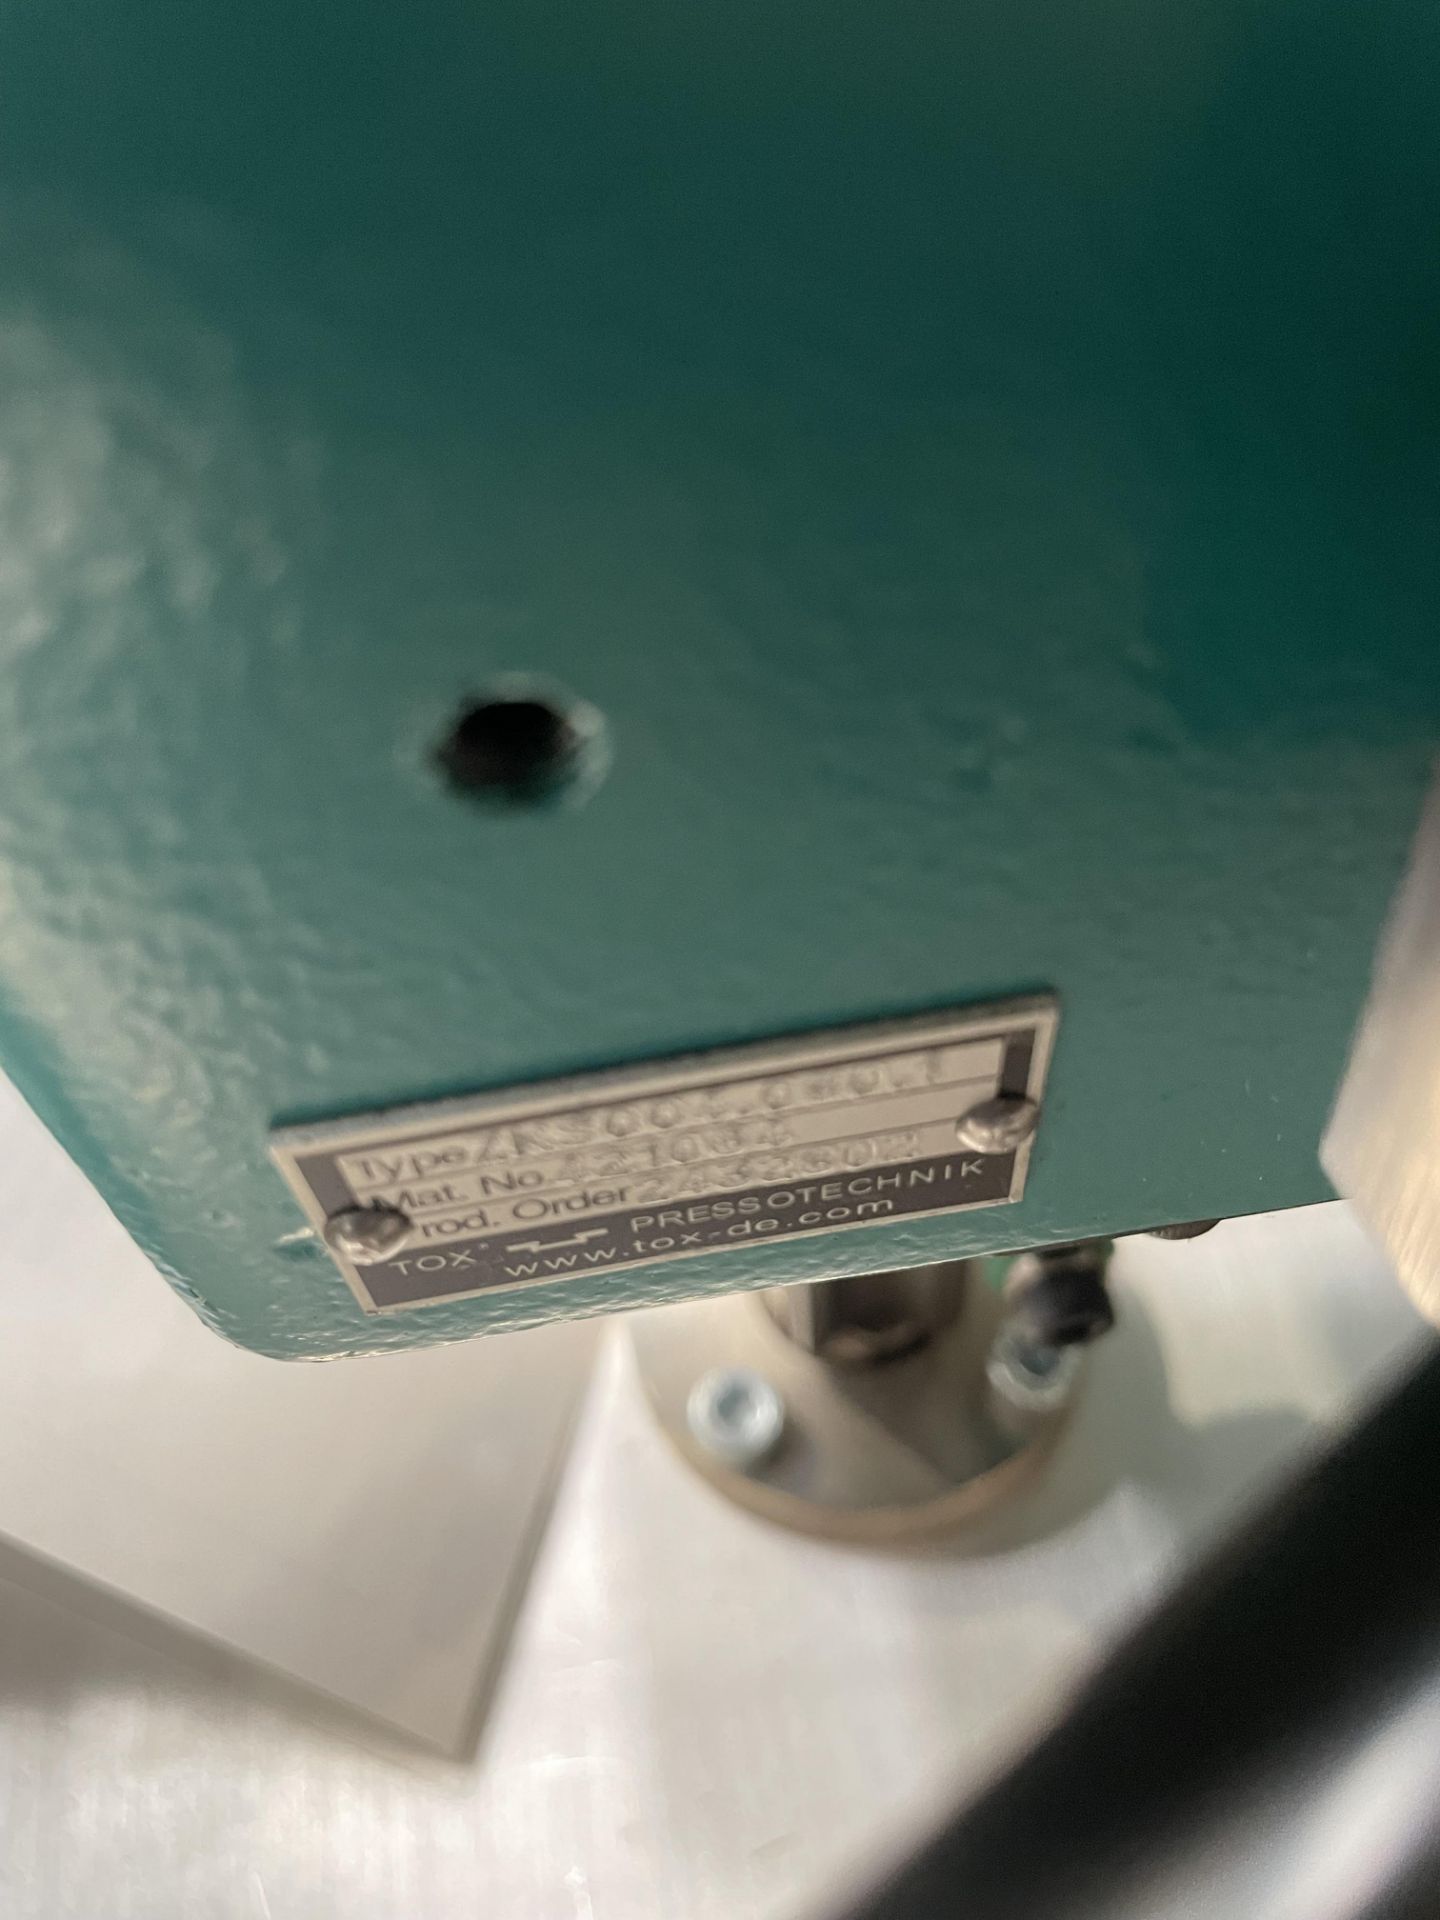 ATS, 80266 test lockout/tagout energy source, Serial No. 80266-2021.1 - Image 3 of 3